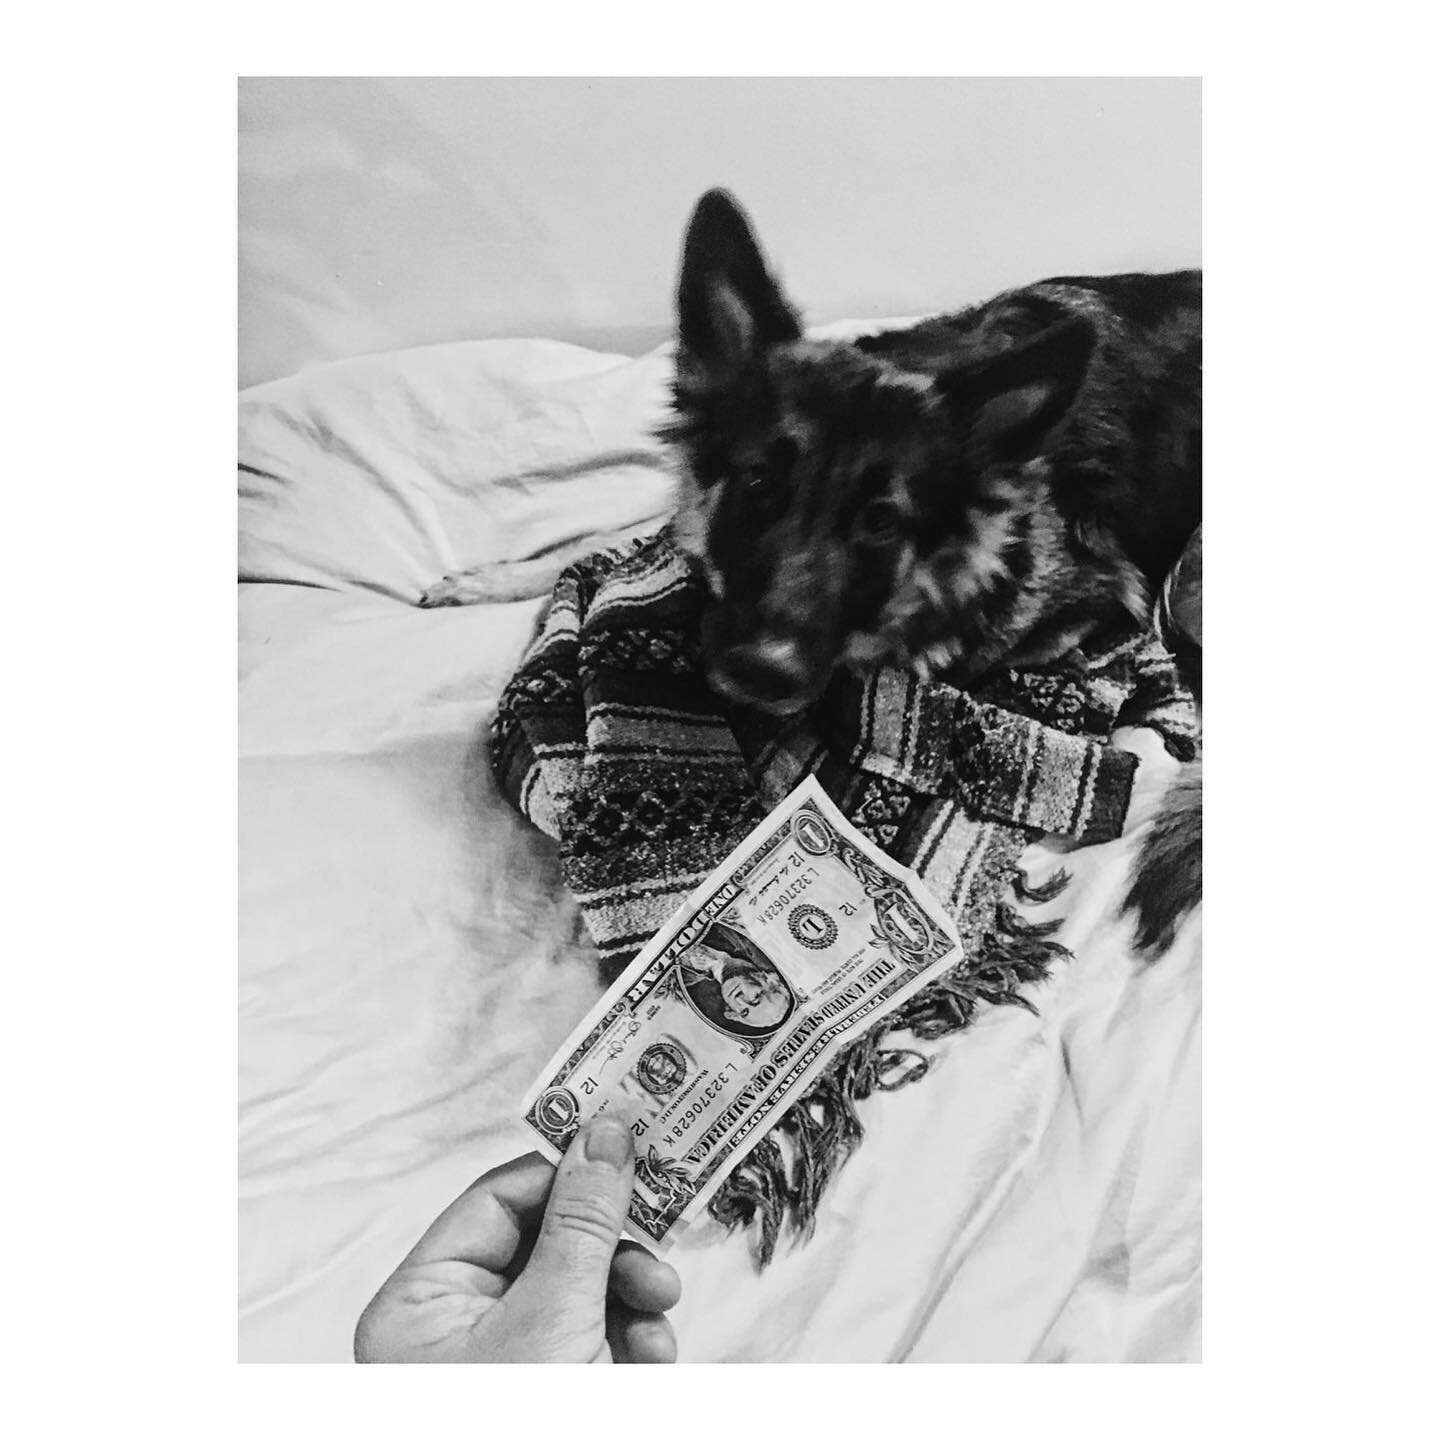 DOG$ - An ongoing photo series by JL 

Currently seeking new models 🐾